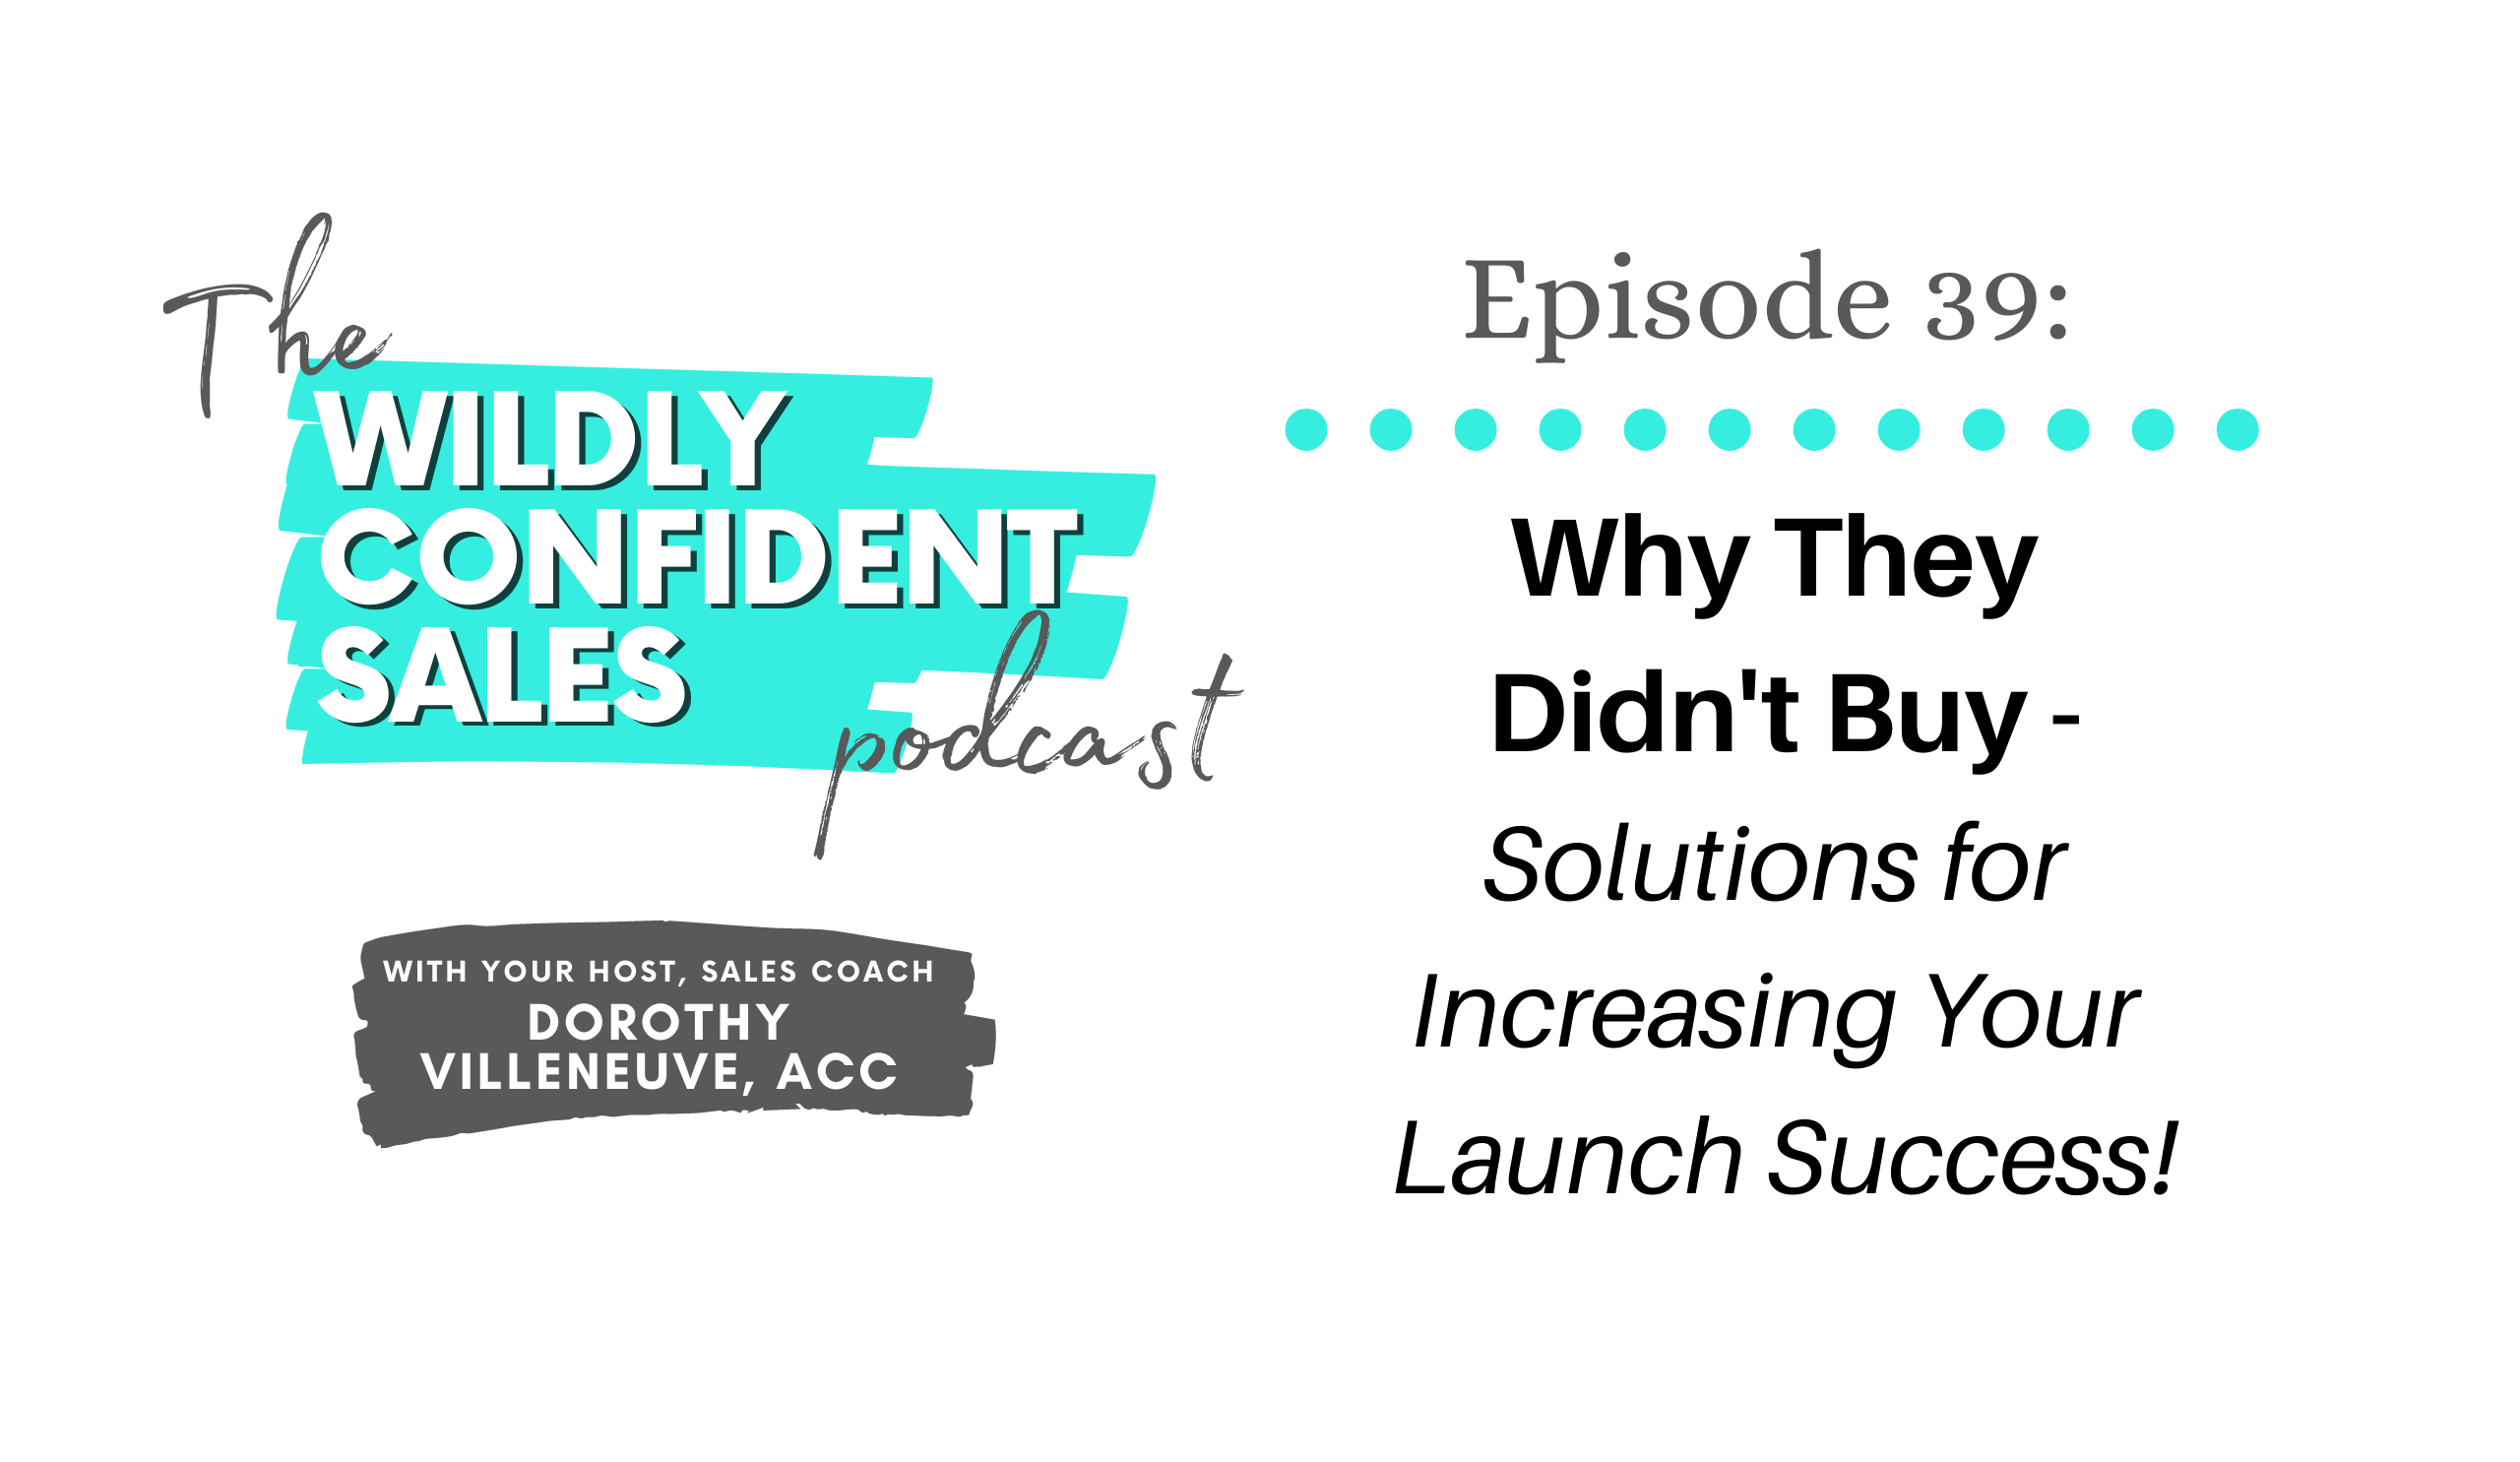 Why They Didn't Buy - Solutions for Increasing Your Launch Success - Wildly Confident Sales with Dorothy Villeneuve